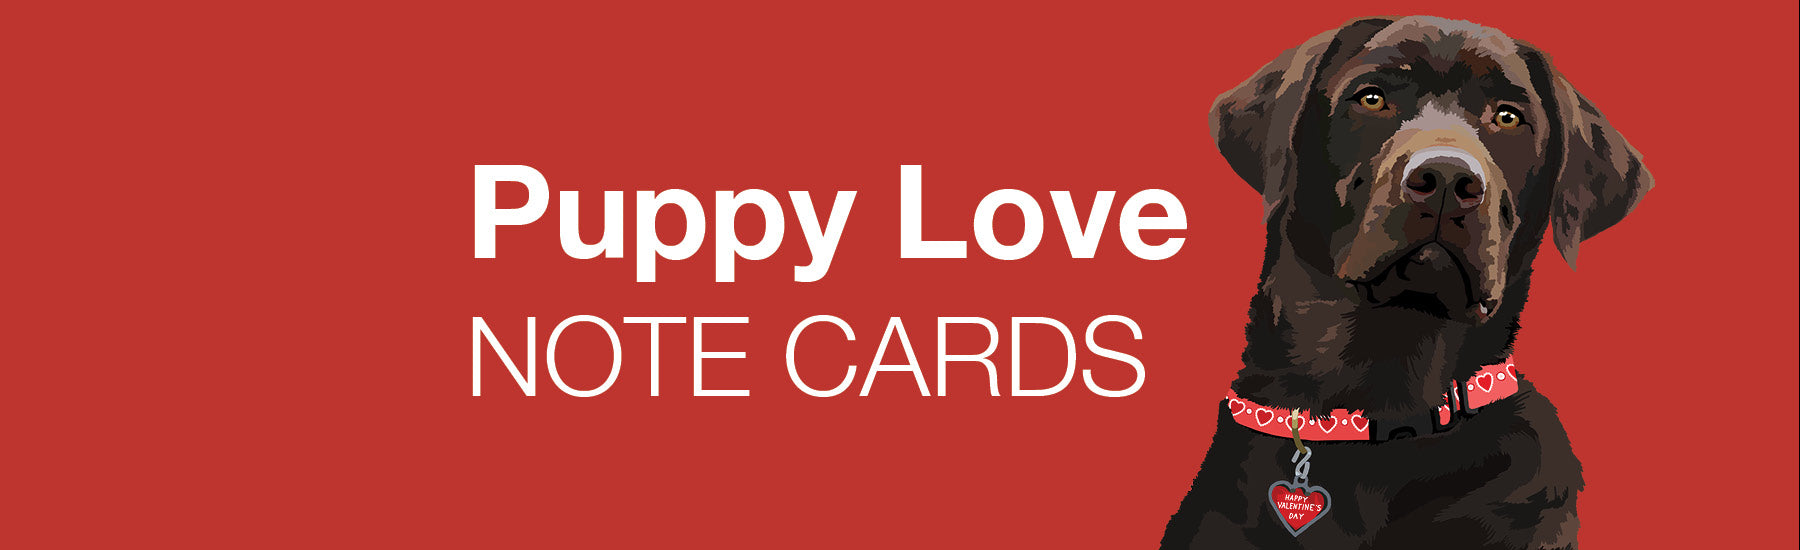 PUPPY LOVE NOTE CARDS